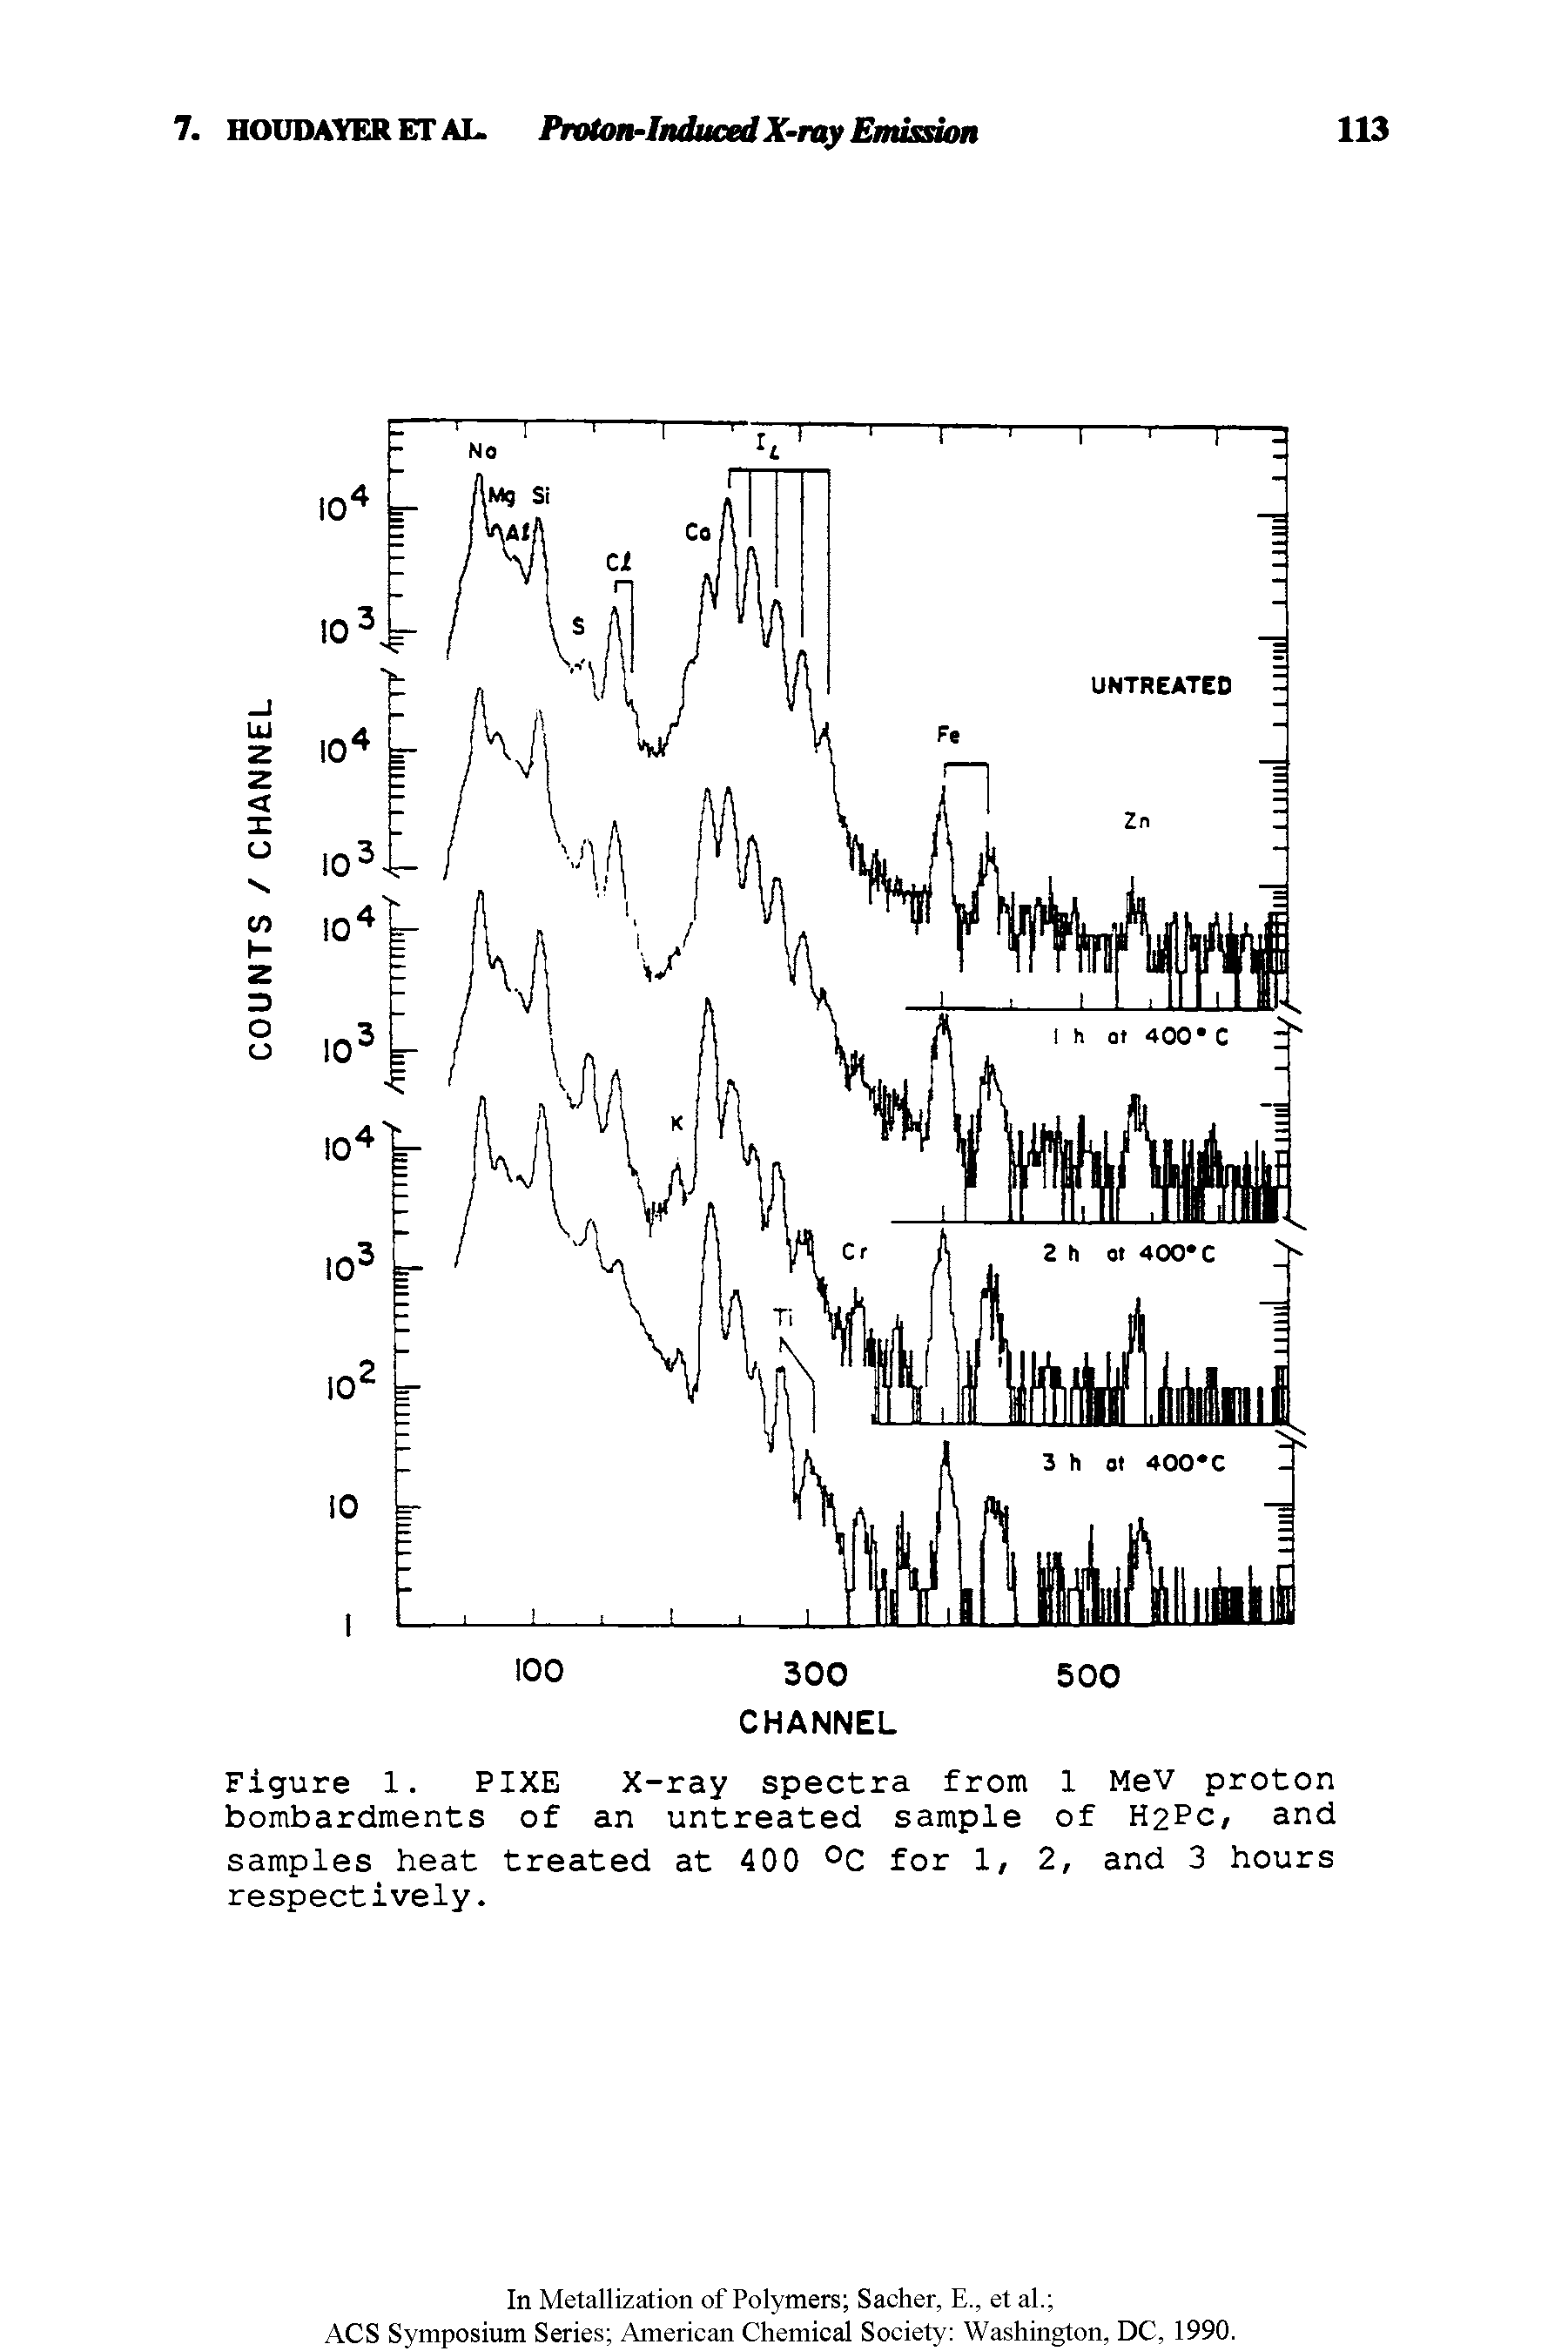 Figure 1. PIXE X-ray spectra from 1 MeV proton bombardments of an untreated sample of H2Pc, and samples heat treated at 400 °C for 1, 2, and 3 hours respectively.